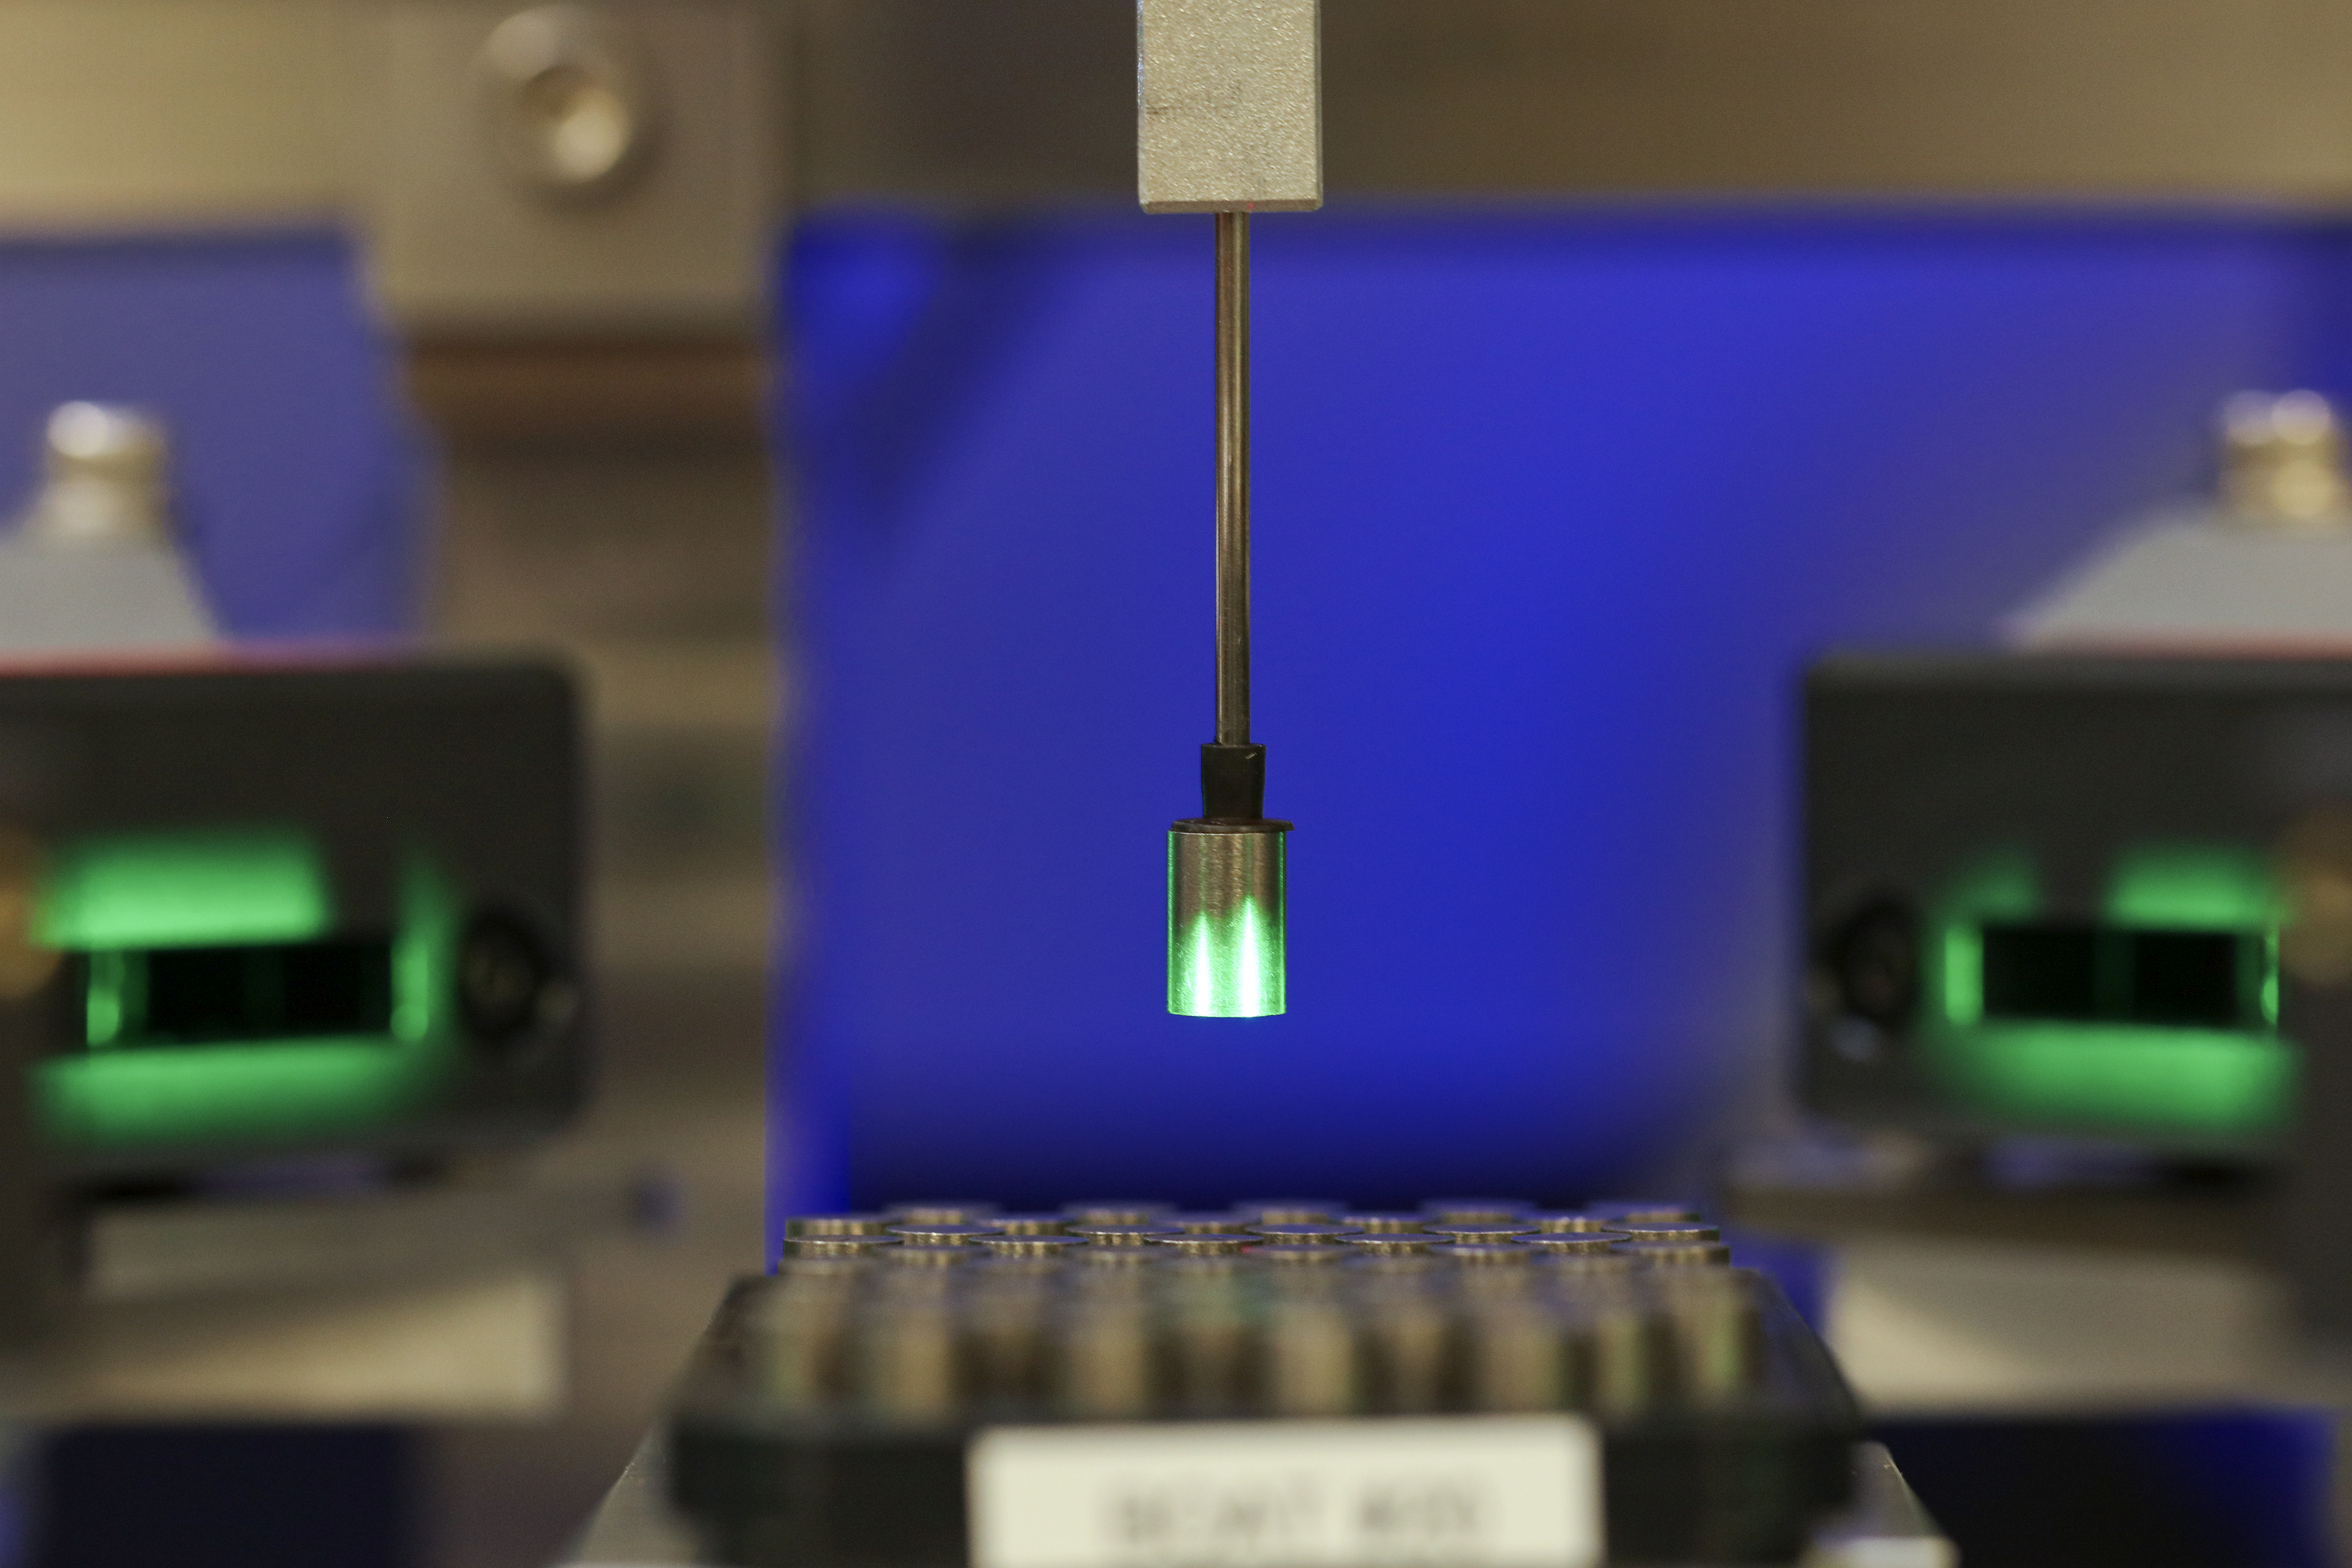 A thin robotic arm lifts a small glowing pellet from a tray of pellets.